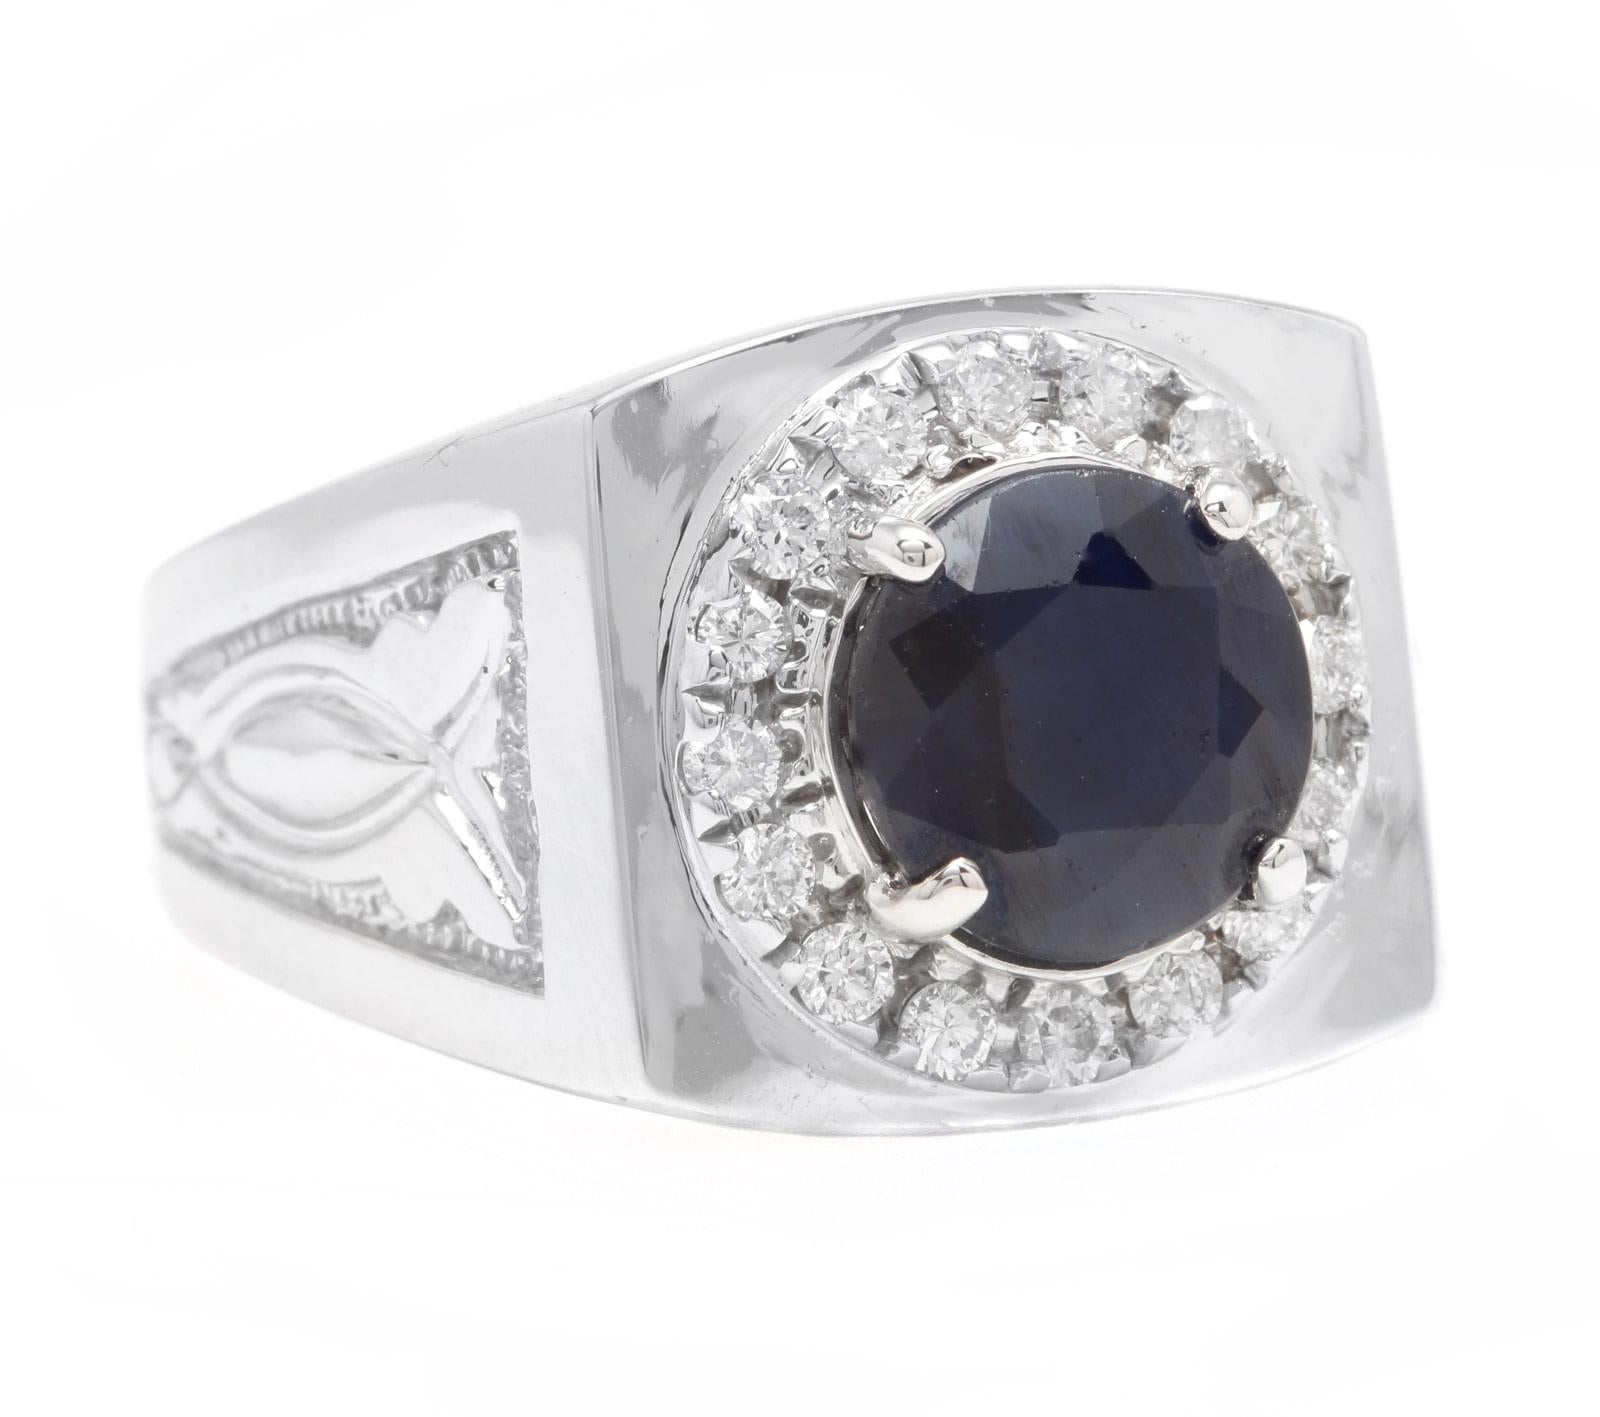 4.50 Carats Natural Diamond & Blue Sapphire 14K Solid White Gold Men's Ring

Amazing looking piece! 

Suggested Replacement Value: $6,000.00

Total Natural Round Cut Diamonds Weight: Approx. 0.50 Carats (color G-H / Clarity SI1-SI2)

Total Natural